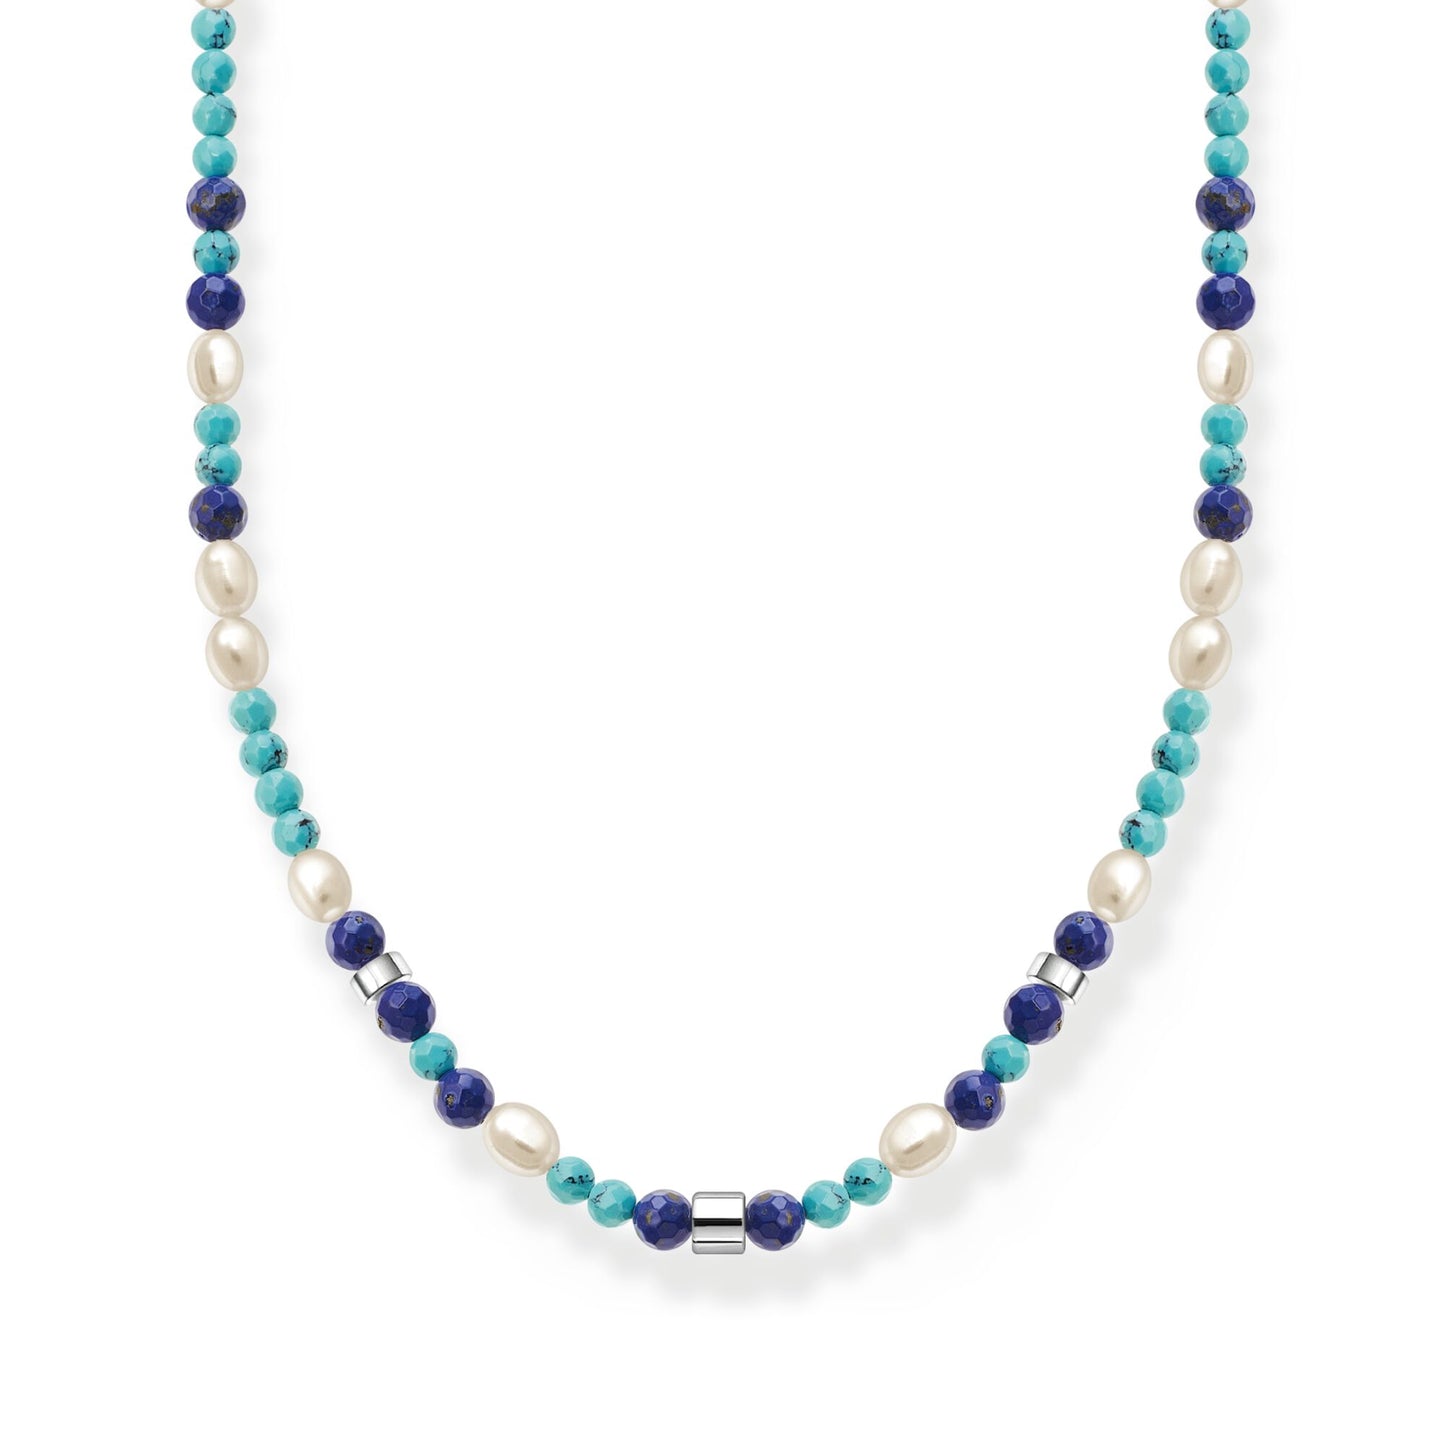 Thomas Sabo Necklace With Blue Stones And Pearls KE2162-775-7